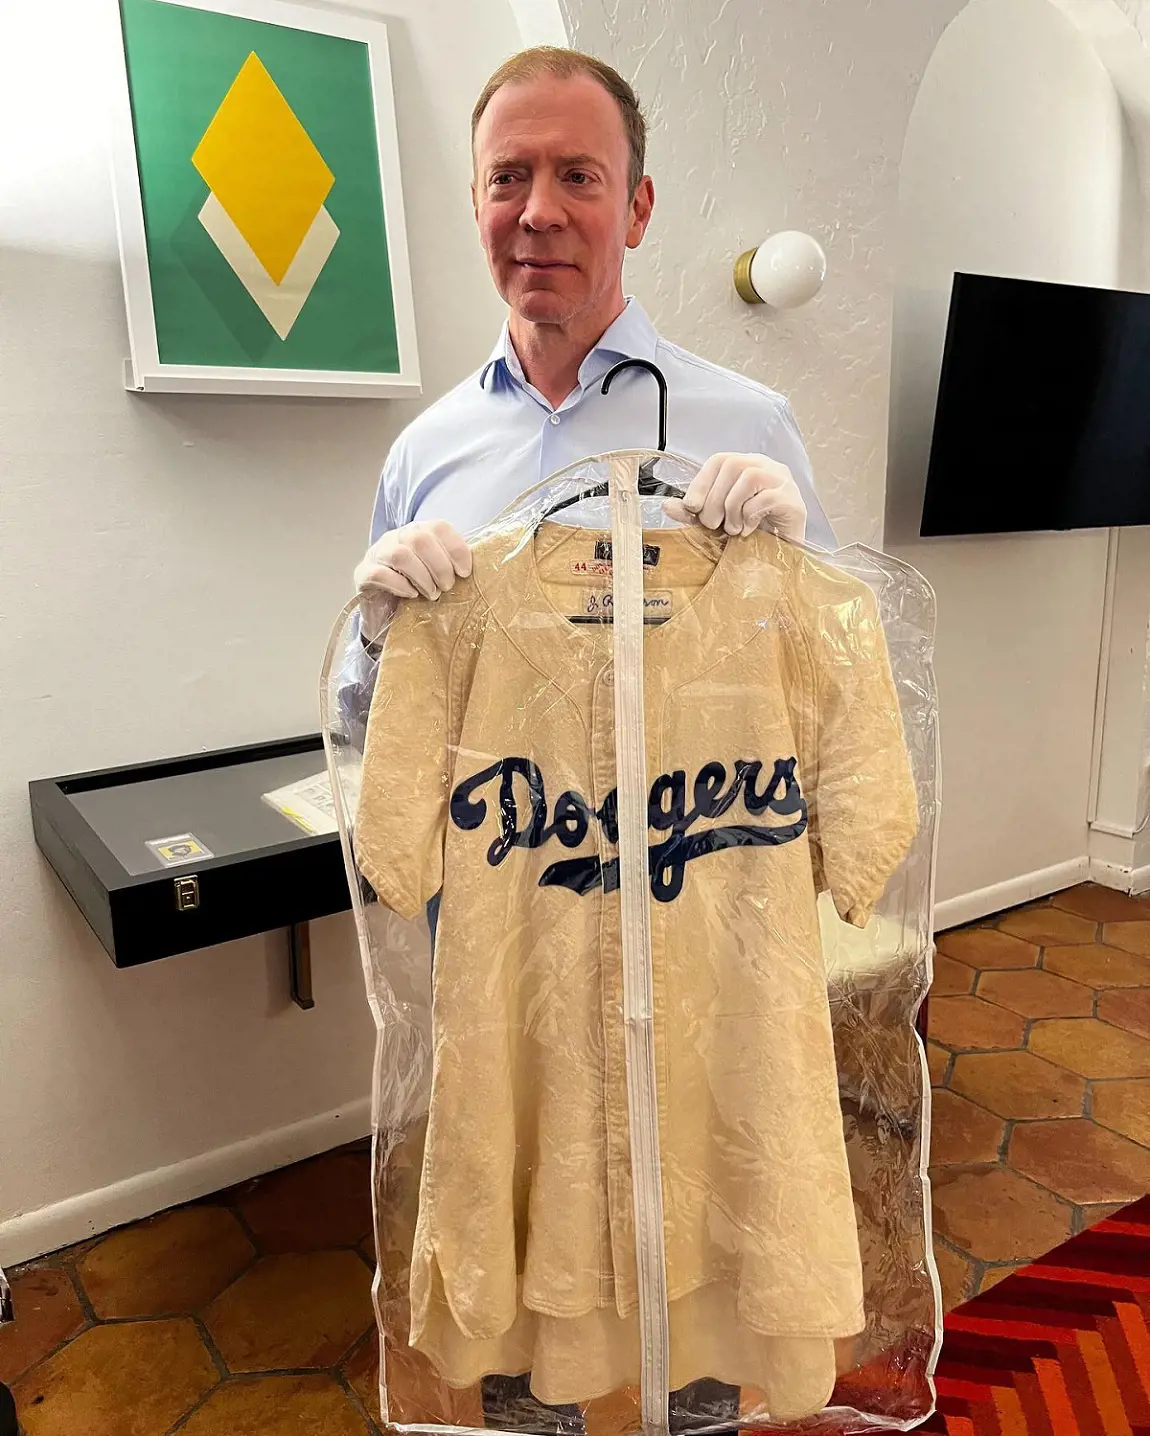 Ken displaying one-of-a-kind Jackie Robinson game-used jersey, his business took another elevation during the pandemic in 2020